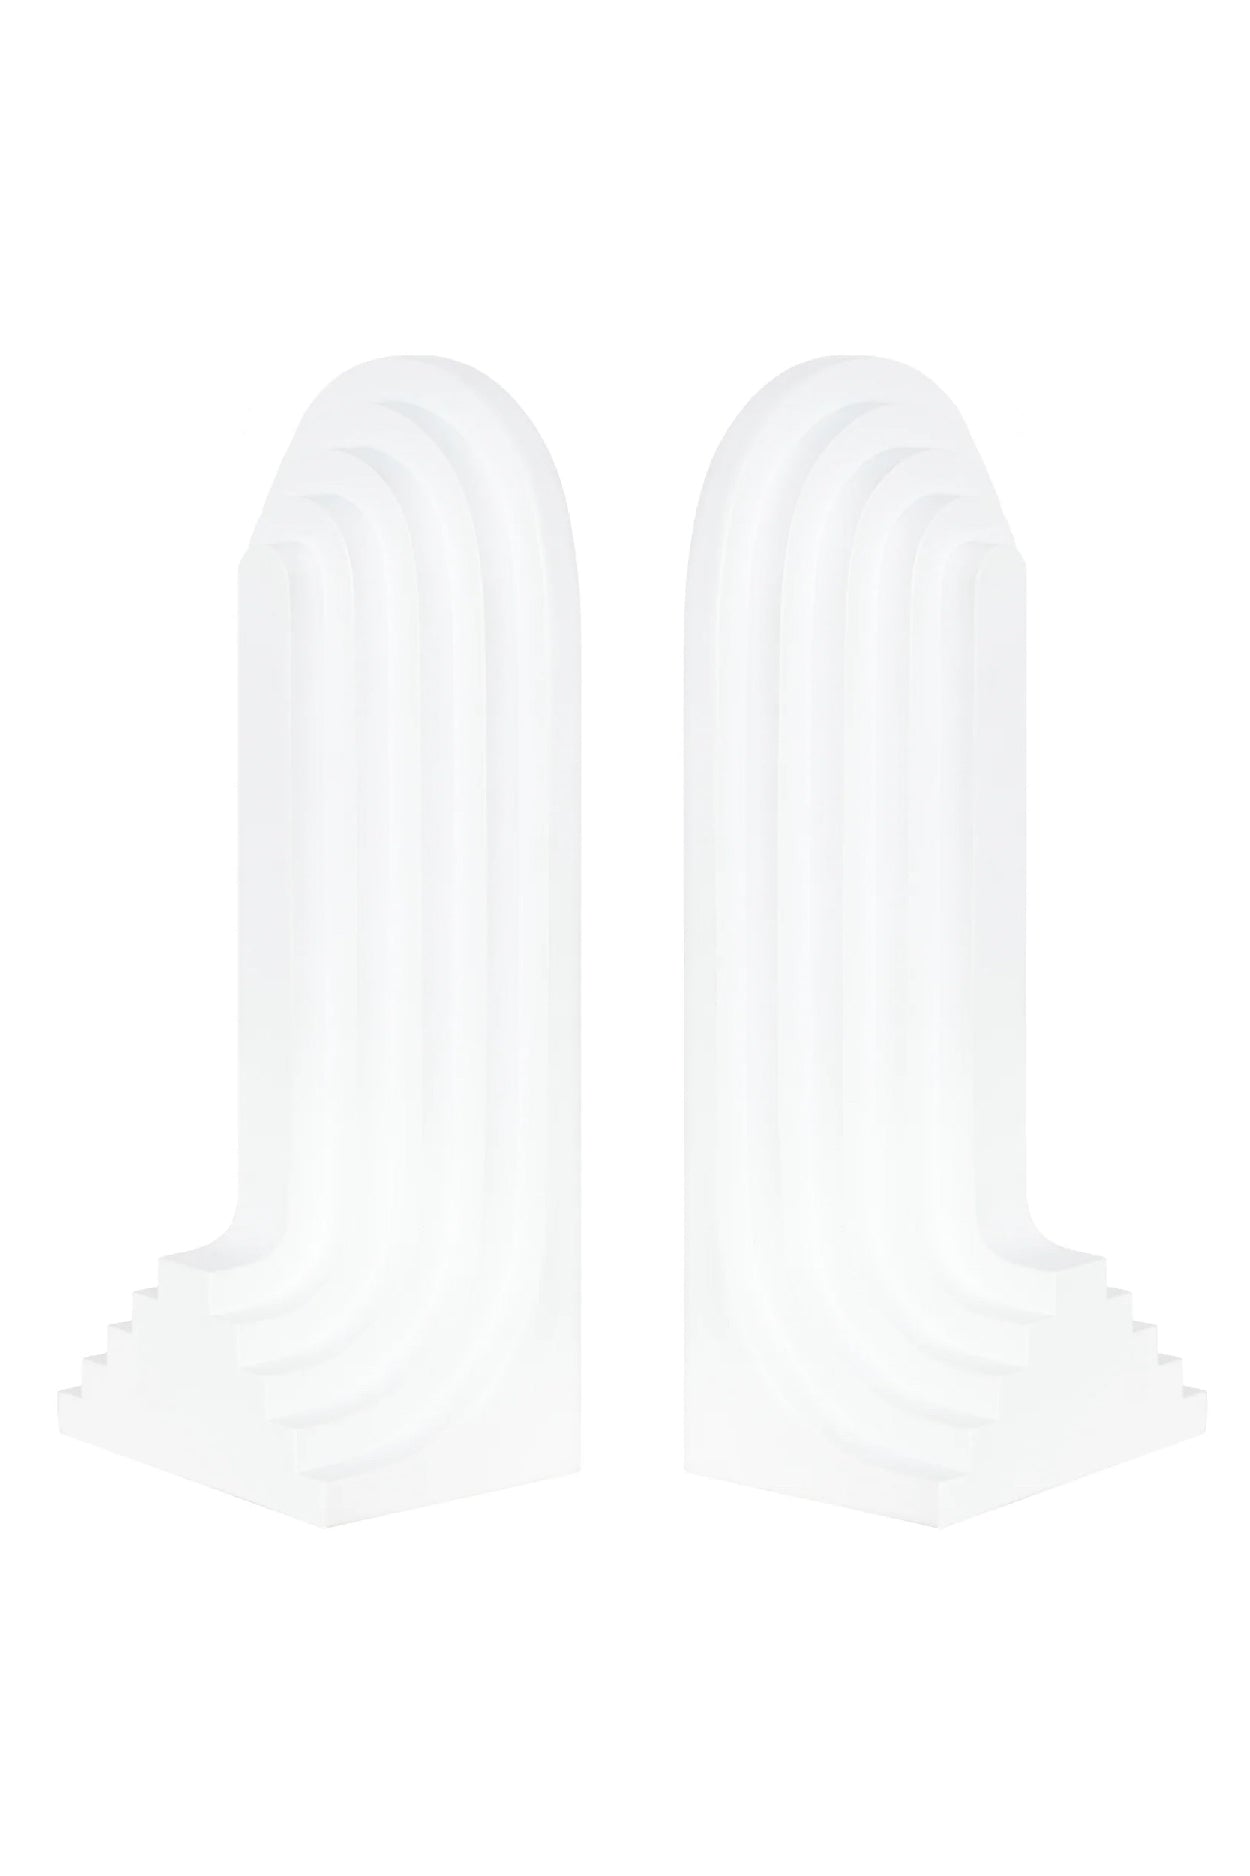 Archway Bookends (Set Of 2)